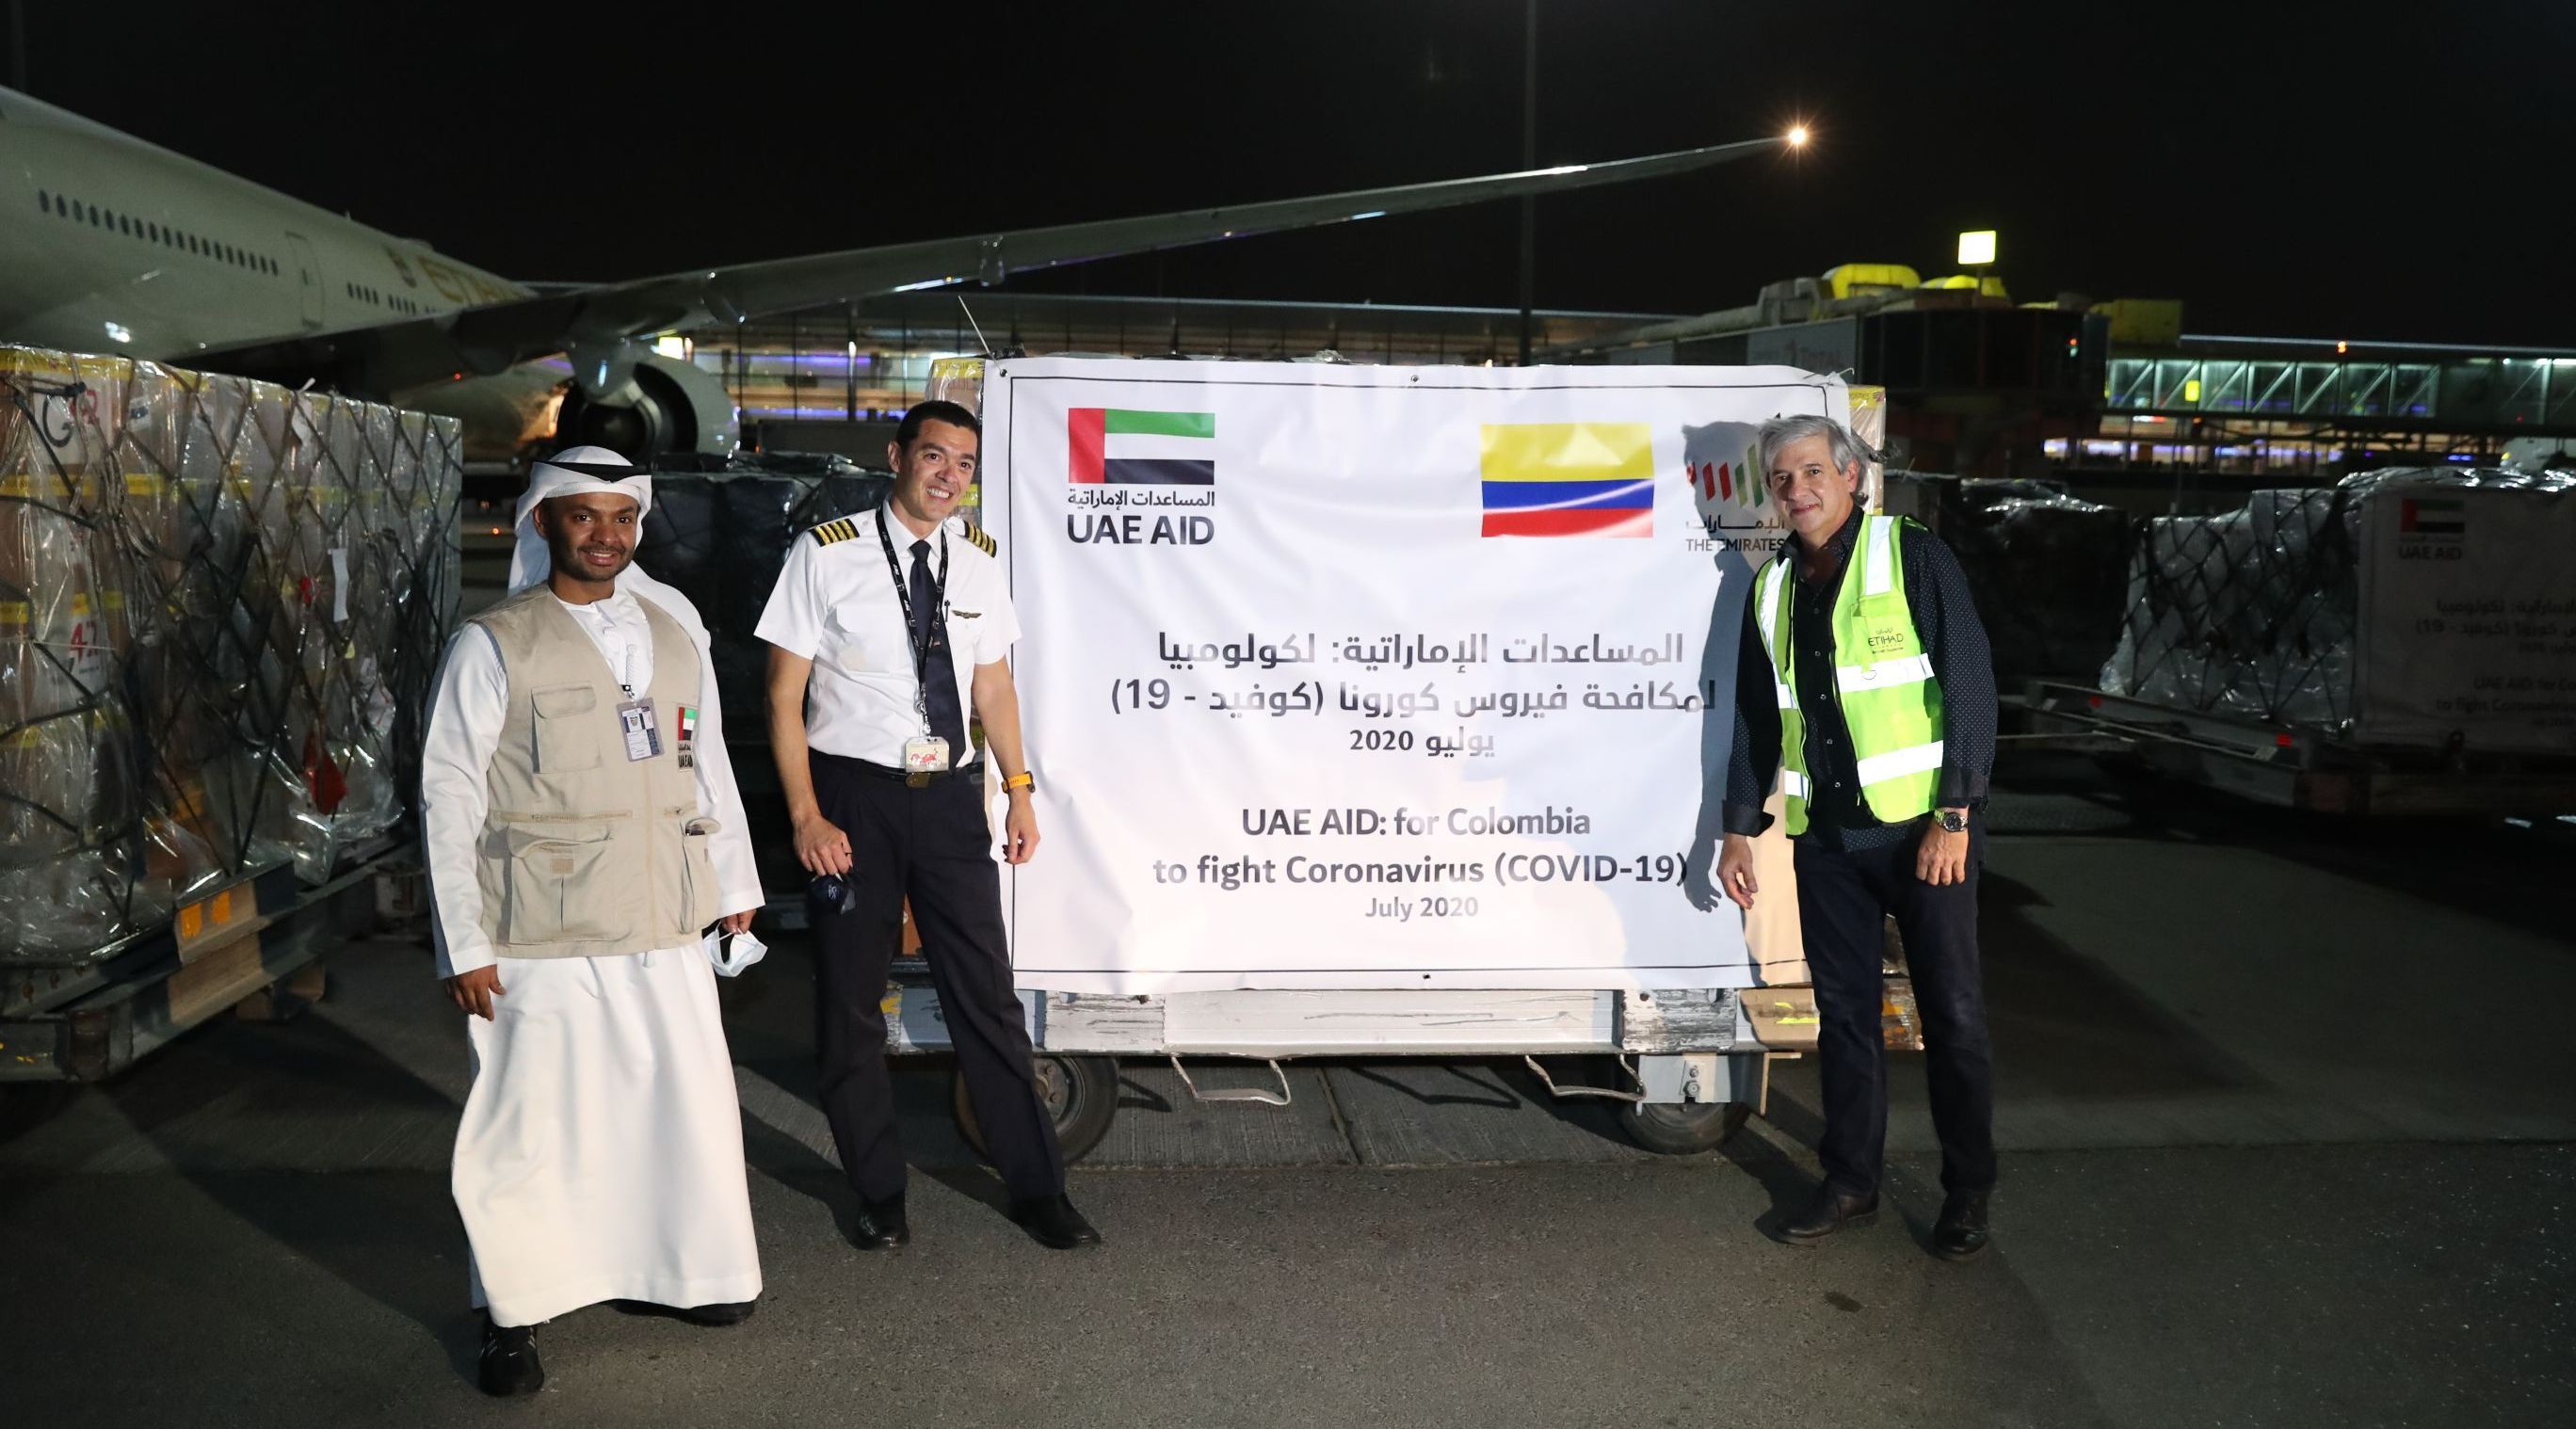 COVID-19 response: UAE sends third medical aid shipment to Colombia